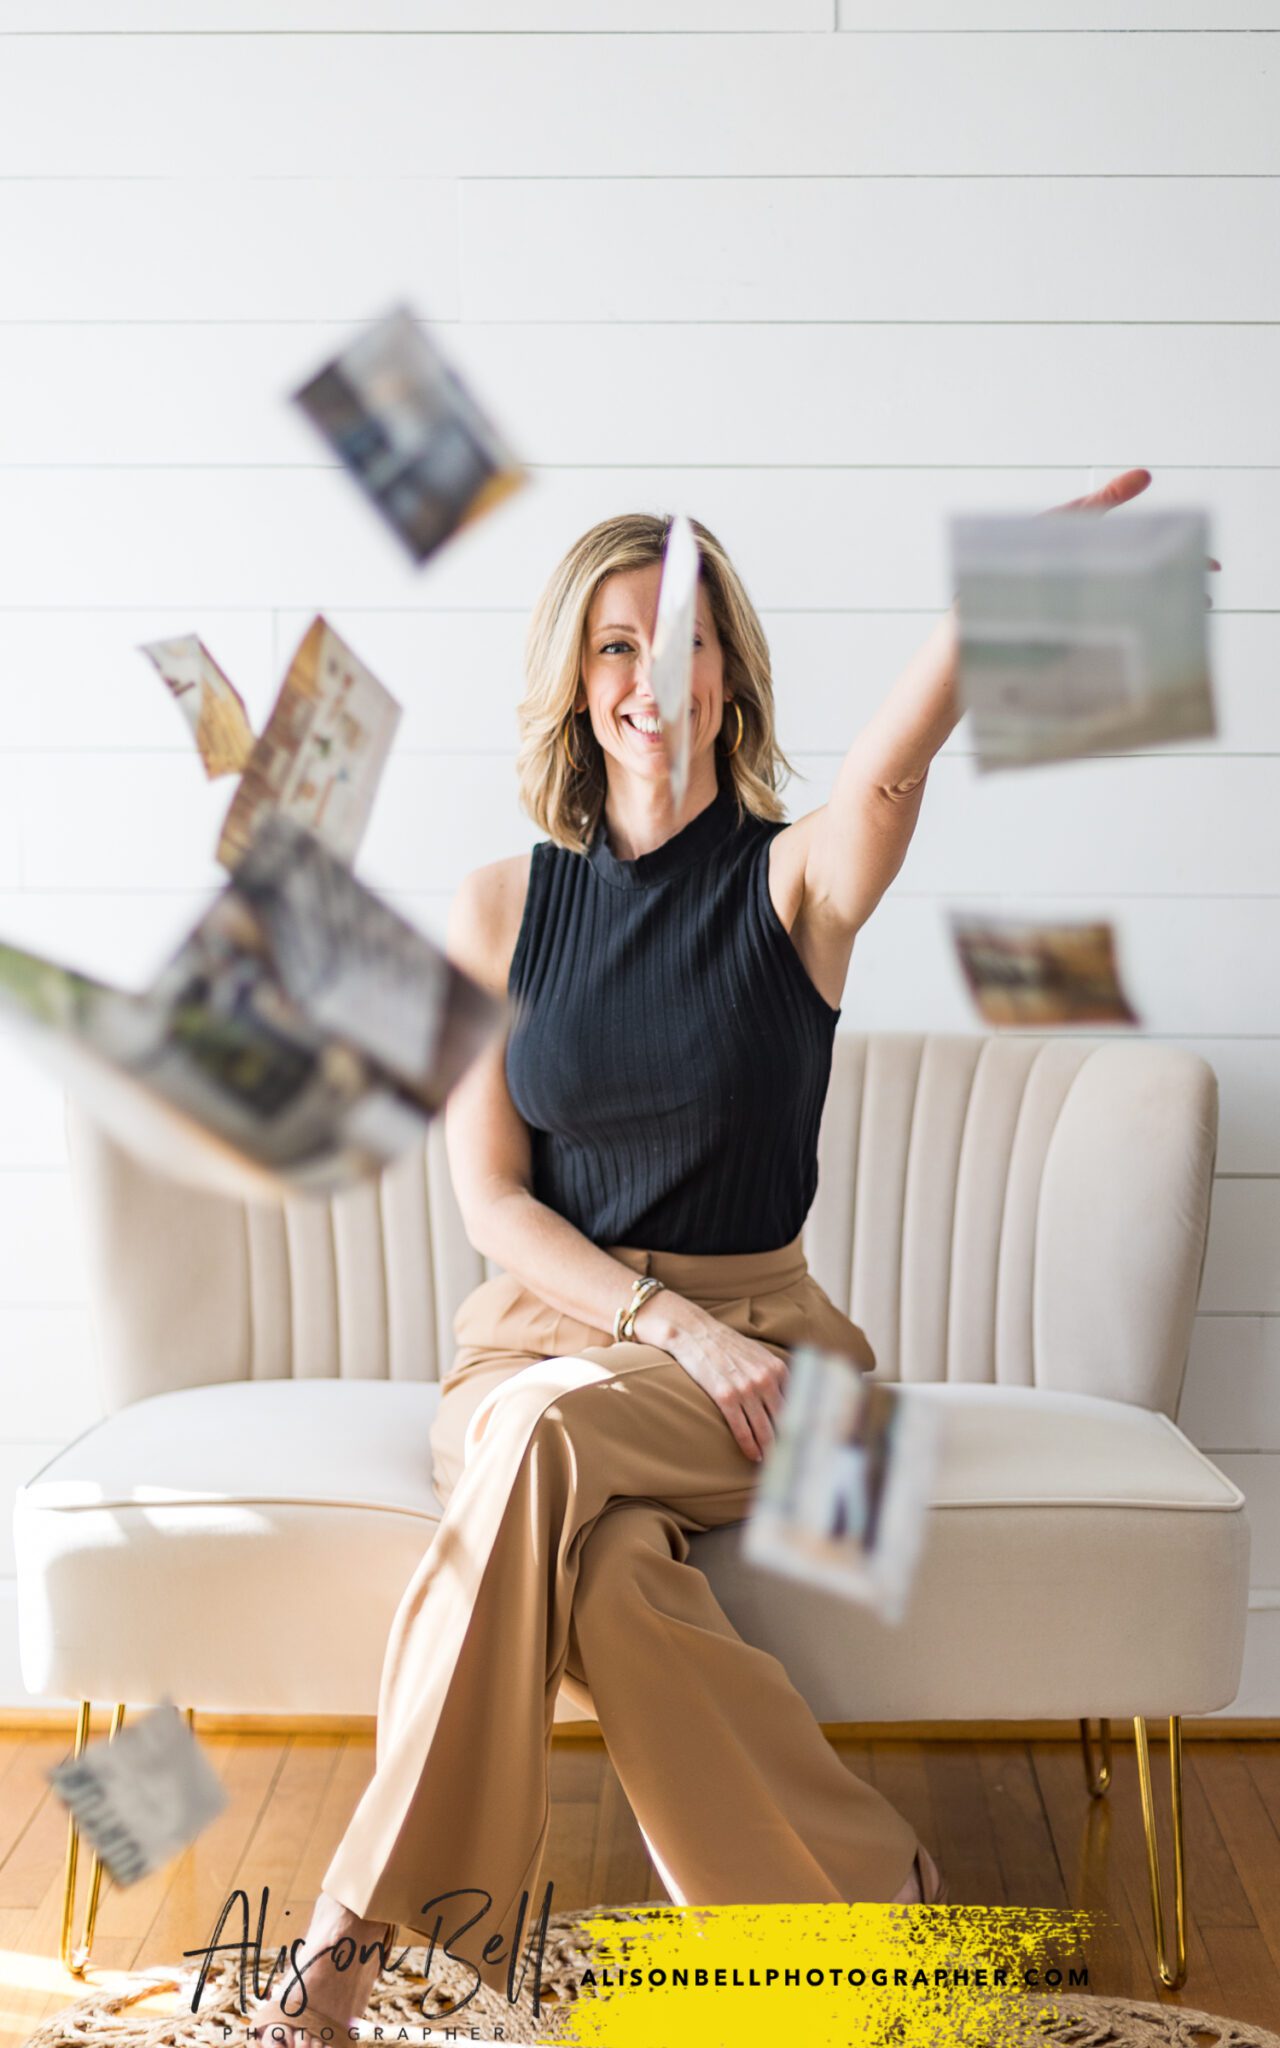 Real estate agent photo ideas by alison bell photogrpaher